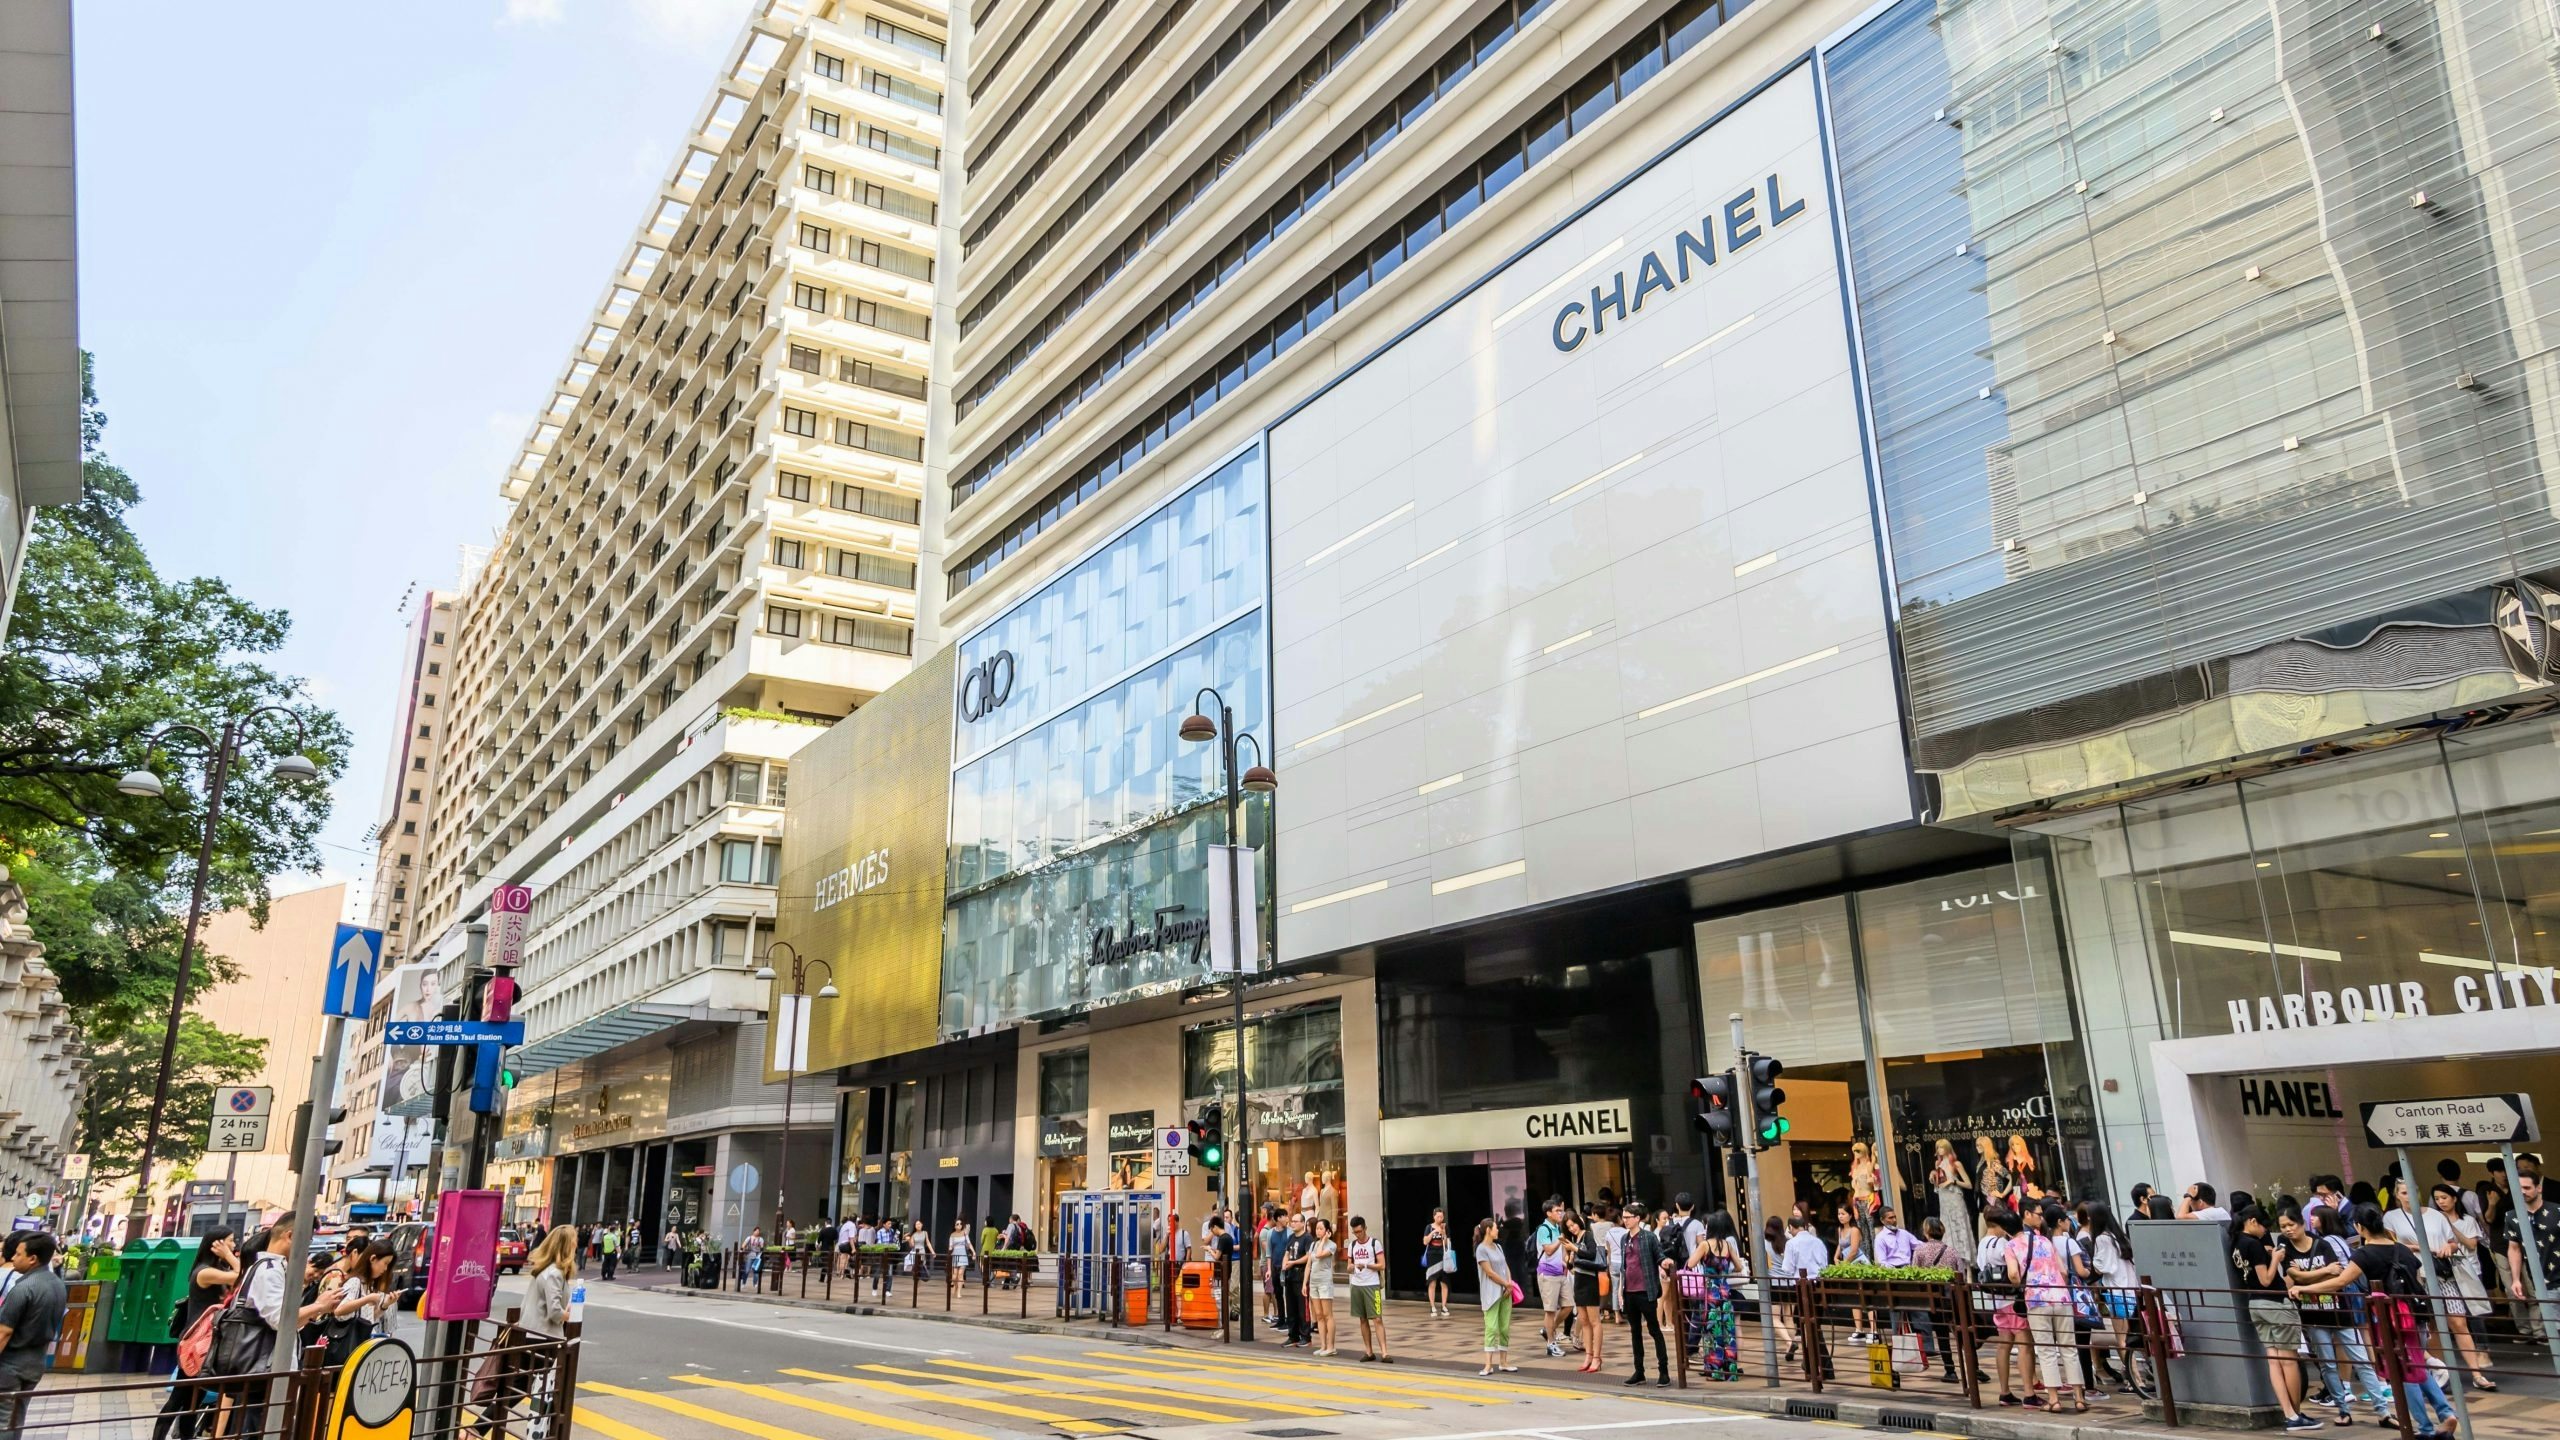 As LVMH, Burberry and other luxury companies reduce their presence in Hong Kong, Chanel appears to be taking the opposite approach. Photo: Shutterstock